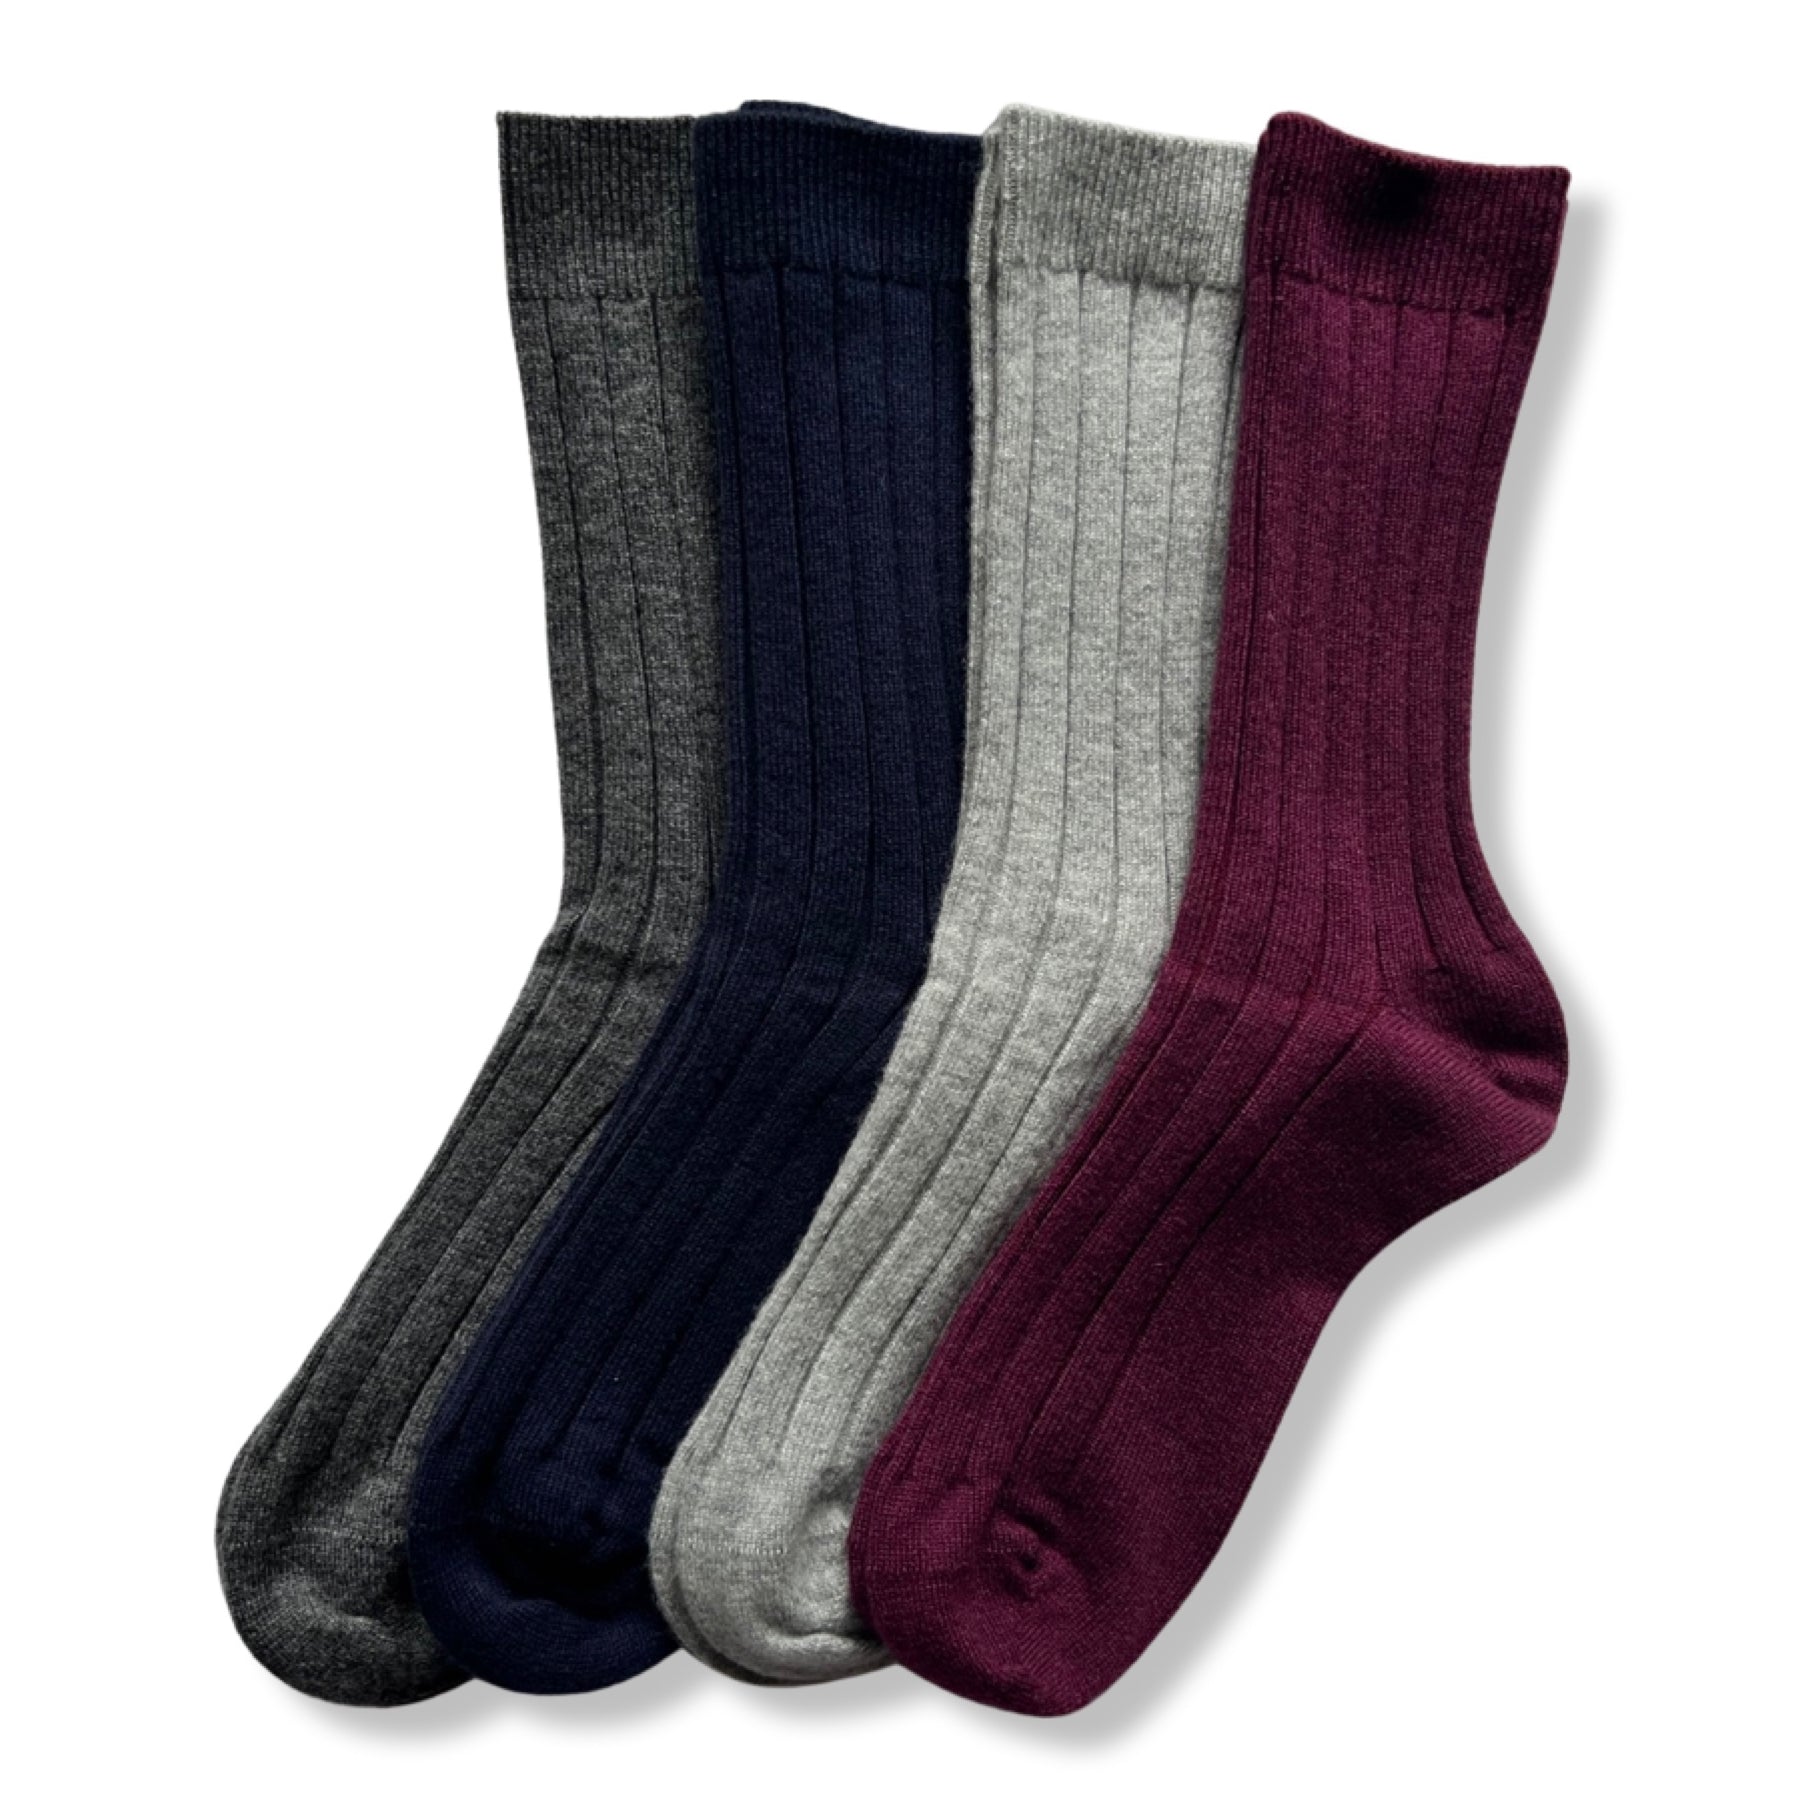 Ribbed Cashmere Socks, Scarves, Hickman & Bousfied - Hickman & Bousfield, Safari and Travel Clothing